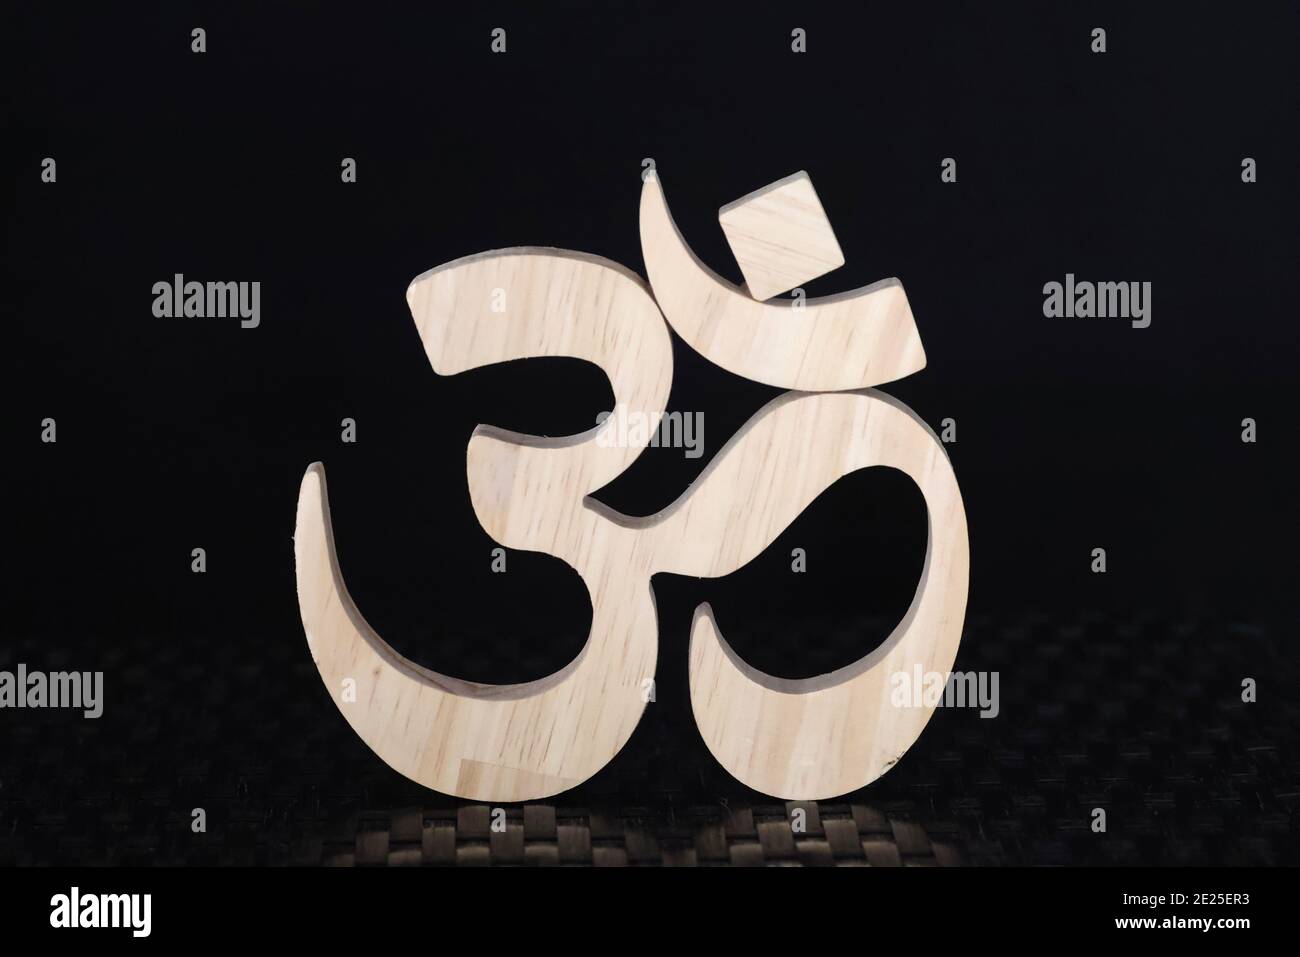 The Om or Aum symbol of Hinduism and Buddhism.  France. Stock Photo